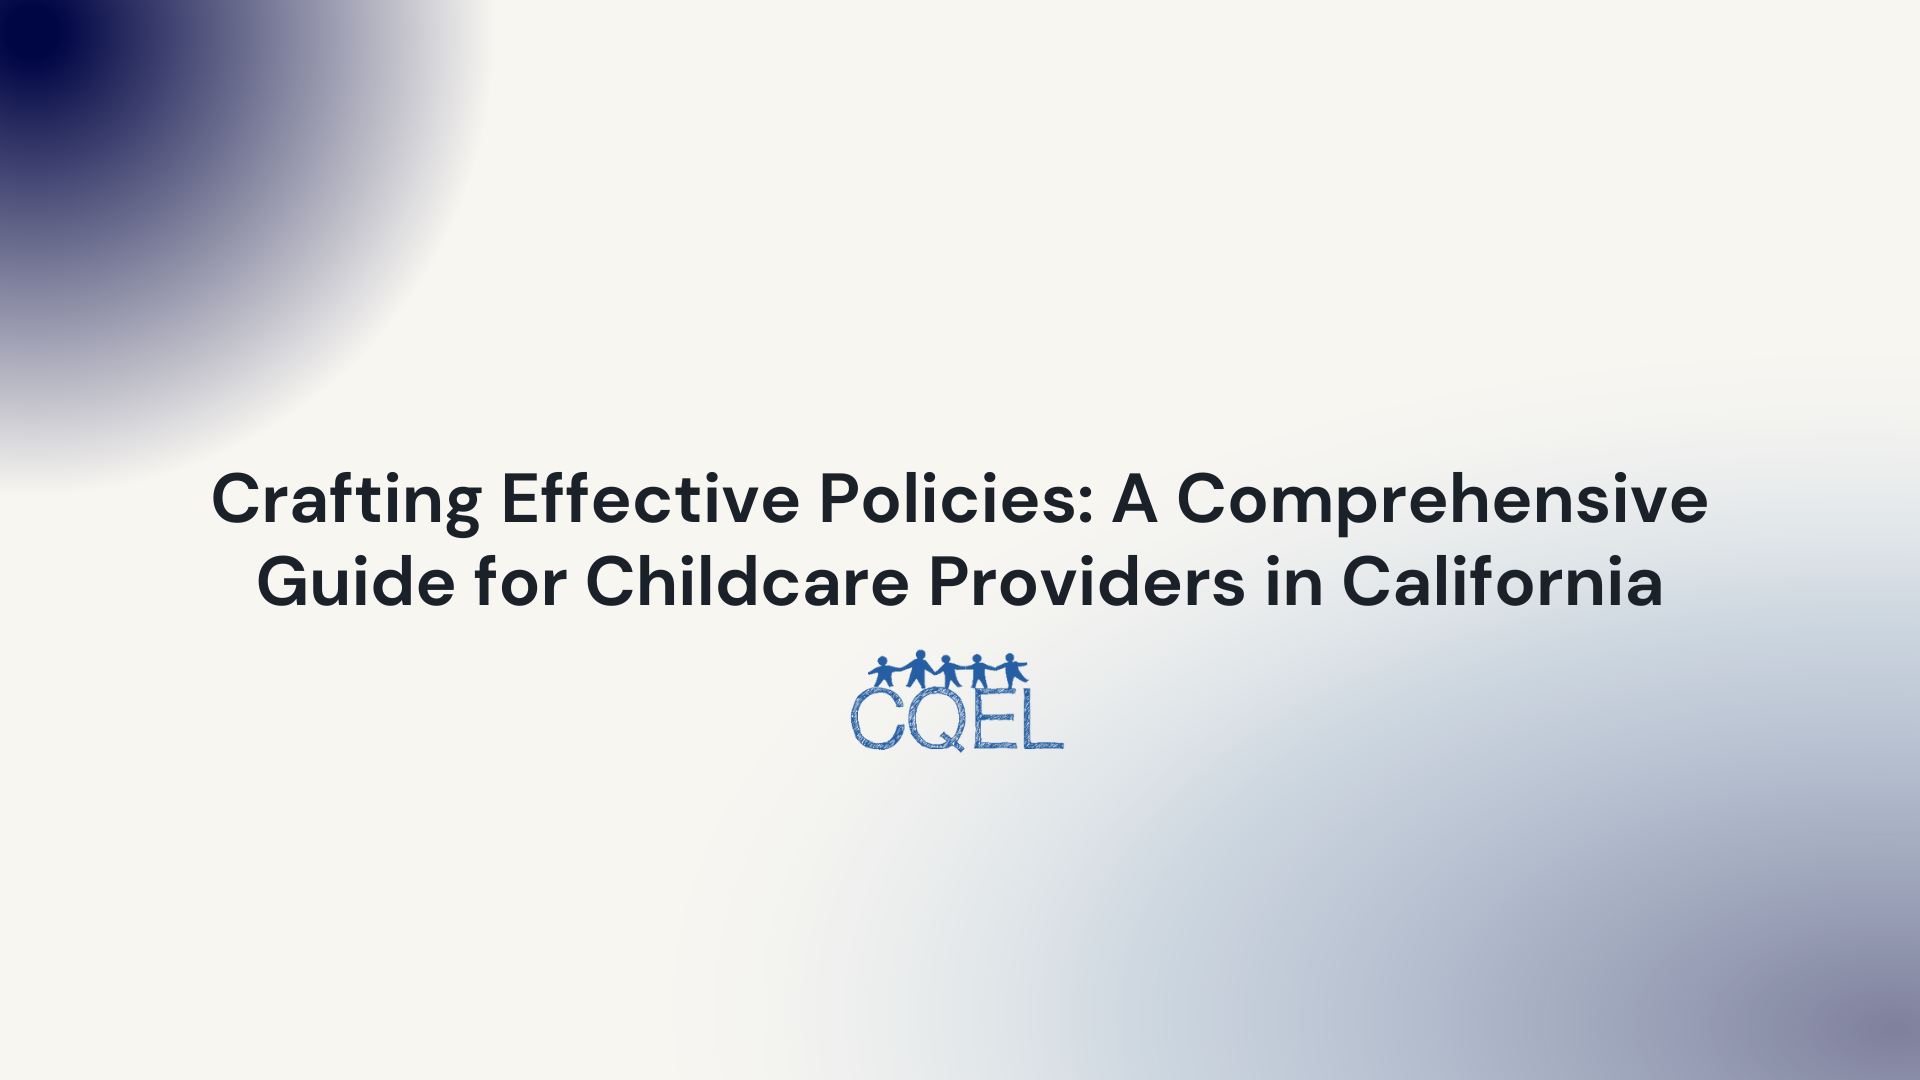 Crafting Effective Policies: A Comprehensive Guide for Childcare Providers in California